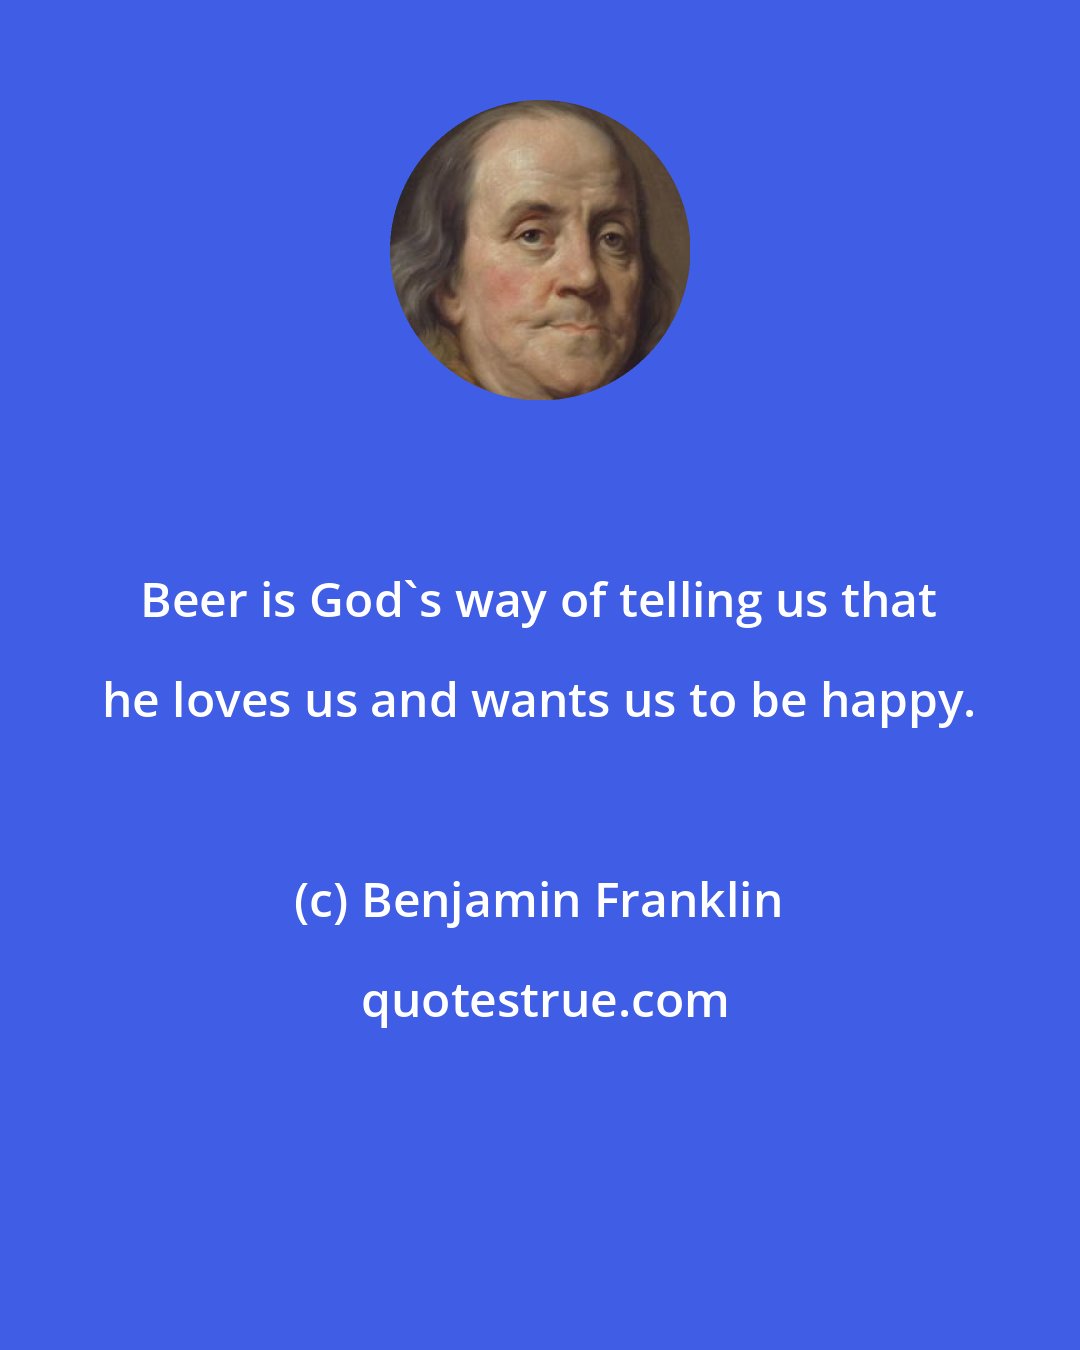 Benjamin Franklin: Beer is God's way of telling us that he loves us and wants us to be happy.